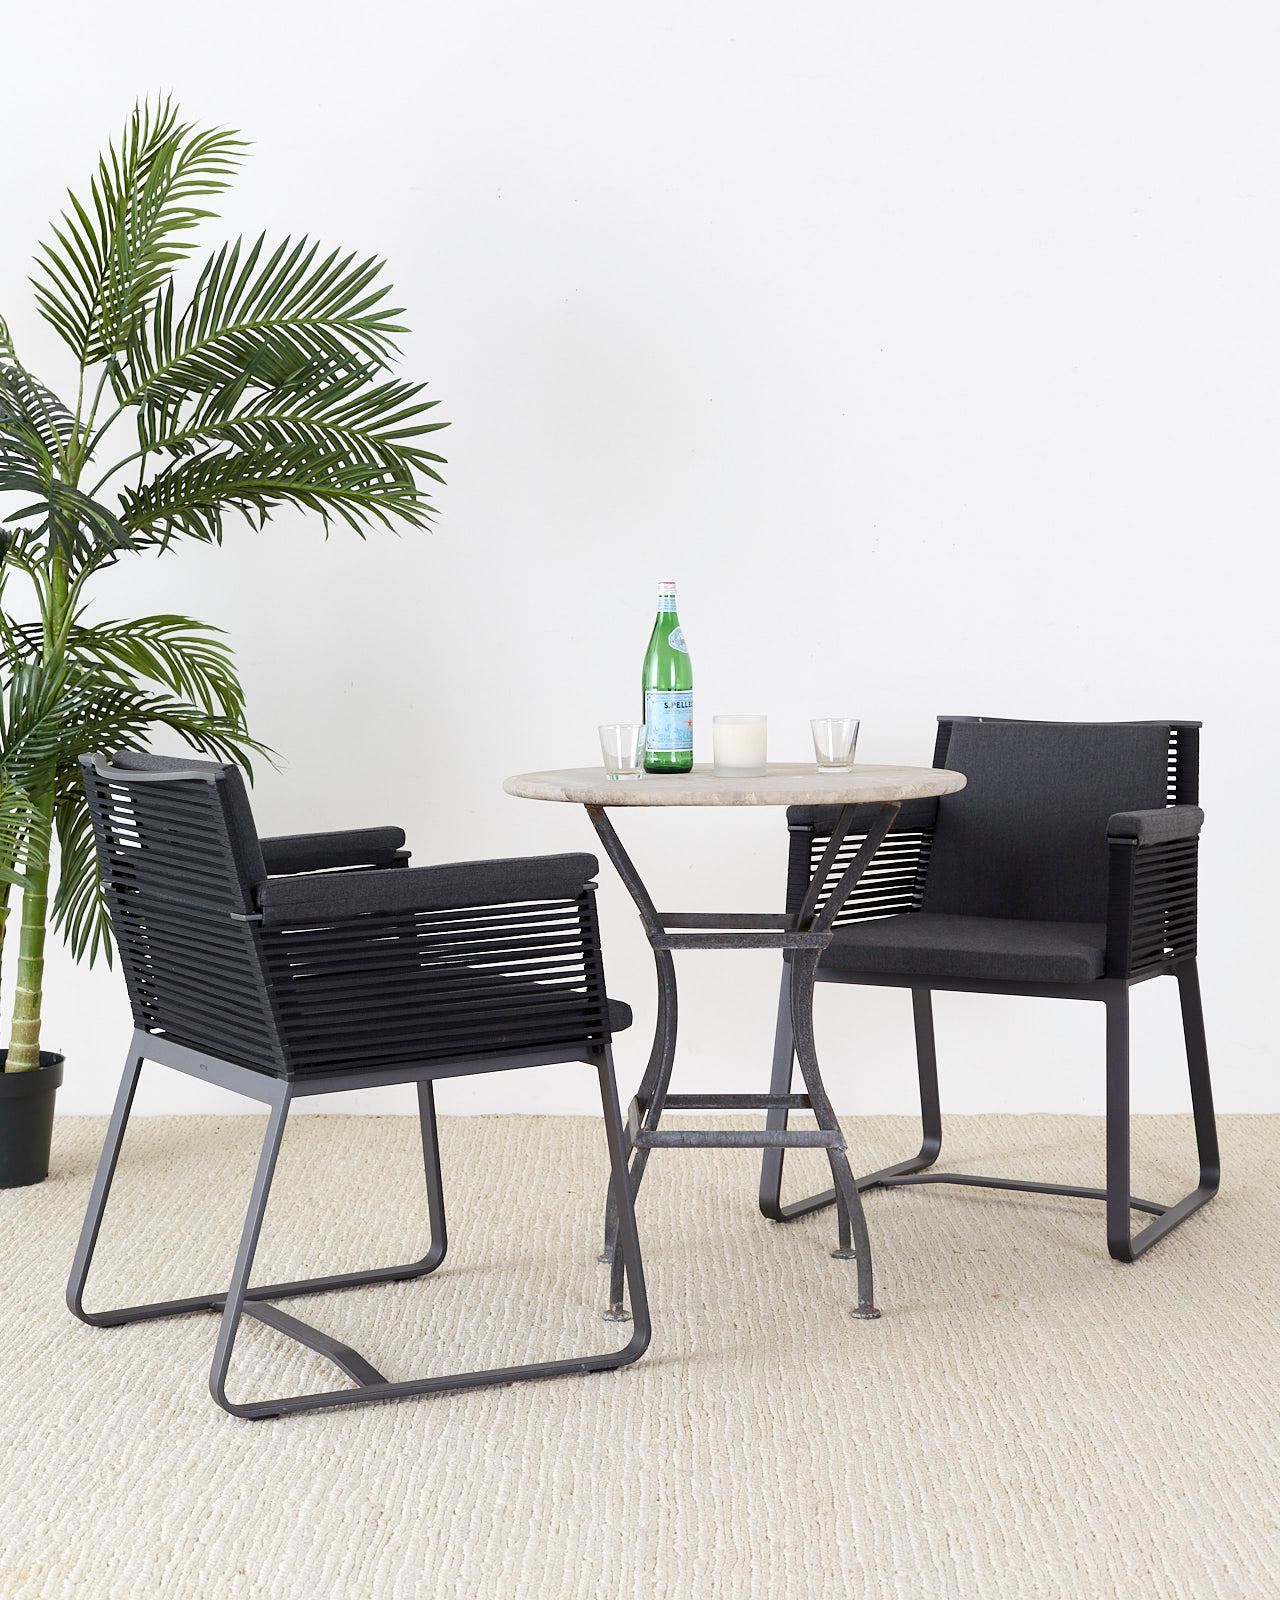 Stylish set of 30 Kettal Studio aluminum dining armchairs landscape design model #941000. These chairs are for indoor and outdoor use constructed from lightweight weatherproof powder coated aluminum. The frame features black rope sides and back with